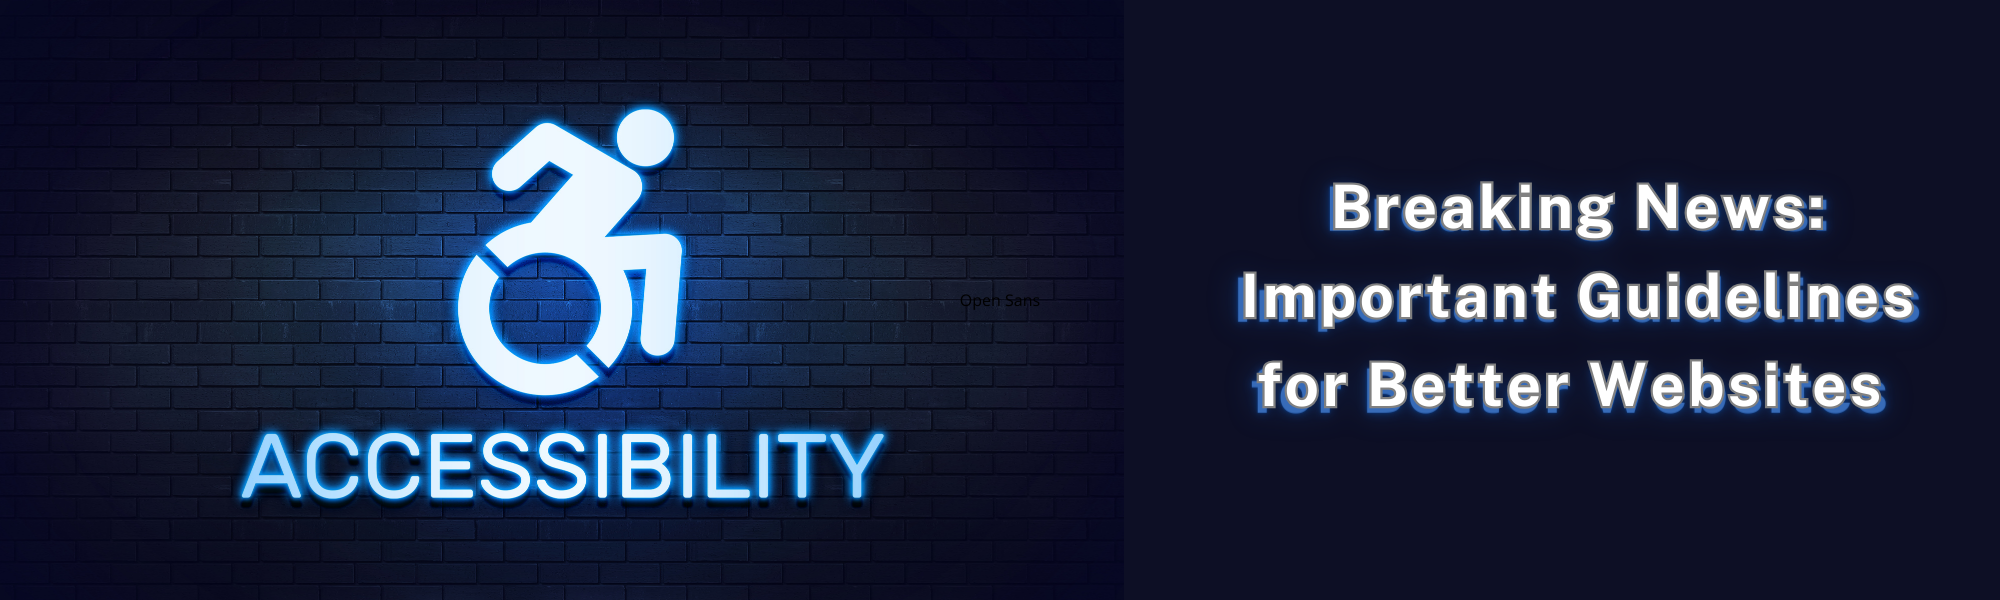 Neon blue sign with a wheelchair symbol and the word 'ACCESSIBILITY' on a dark brick wall background. To the right, the text 'Breaking News: Important Guidelines for Better Websites' is displayed in white letters with a blue outline on a dark background.